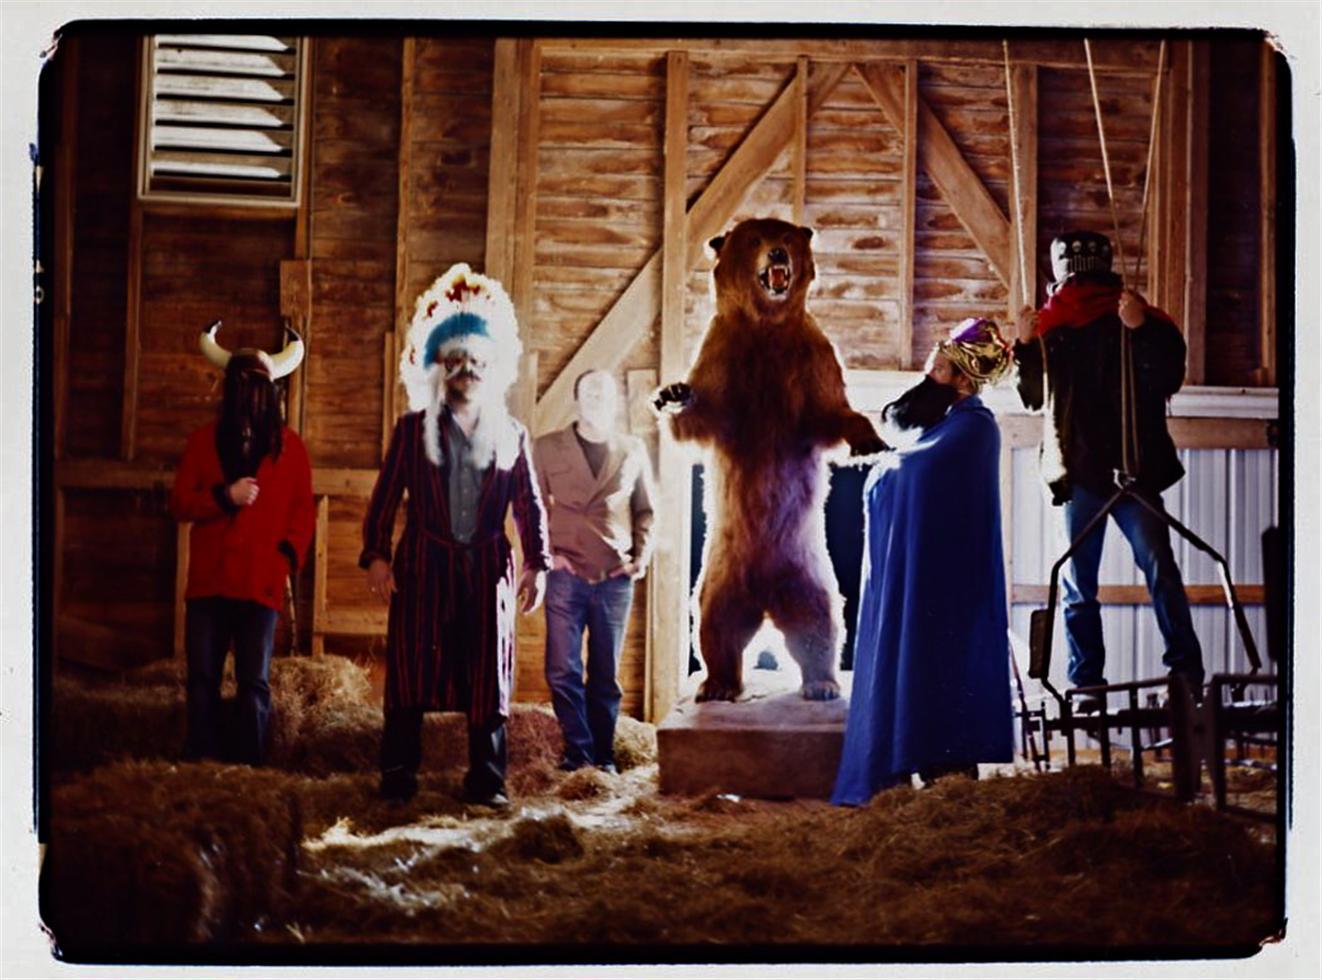 Sam Erickson Color Photograph - My Morning Jacket in the barn, Louisville KY, 2003